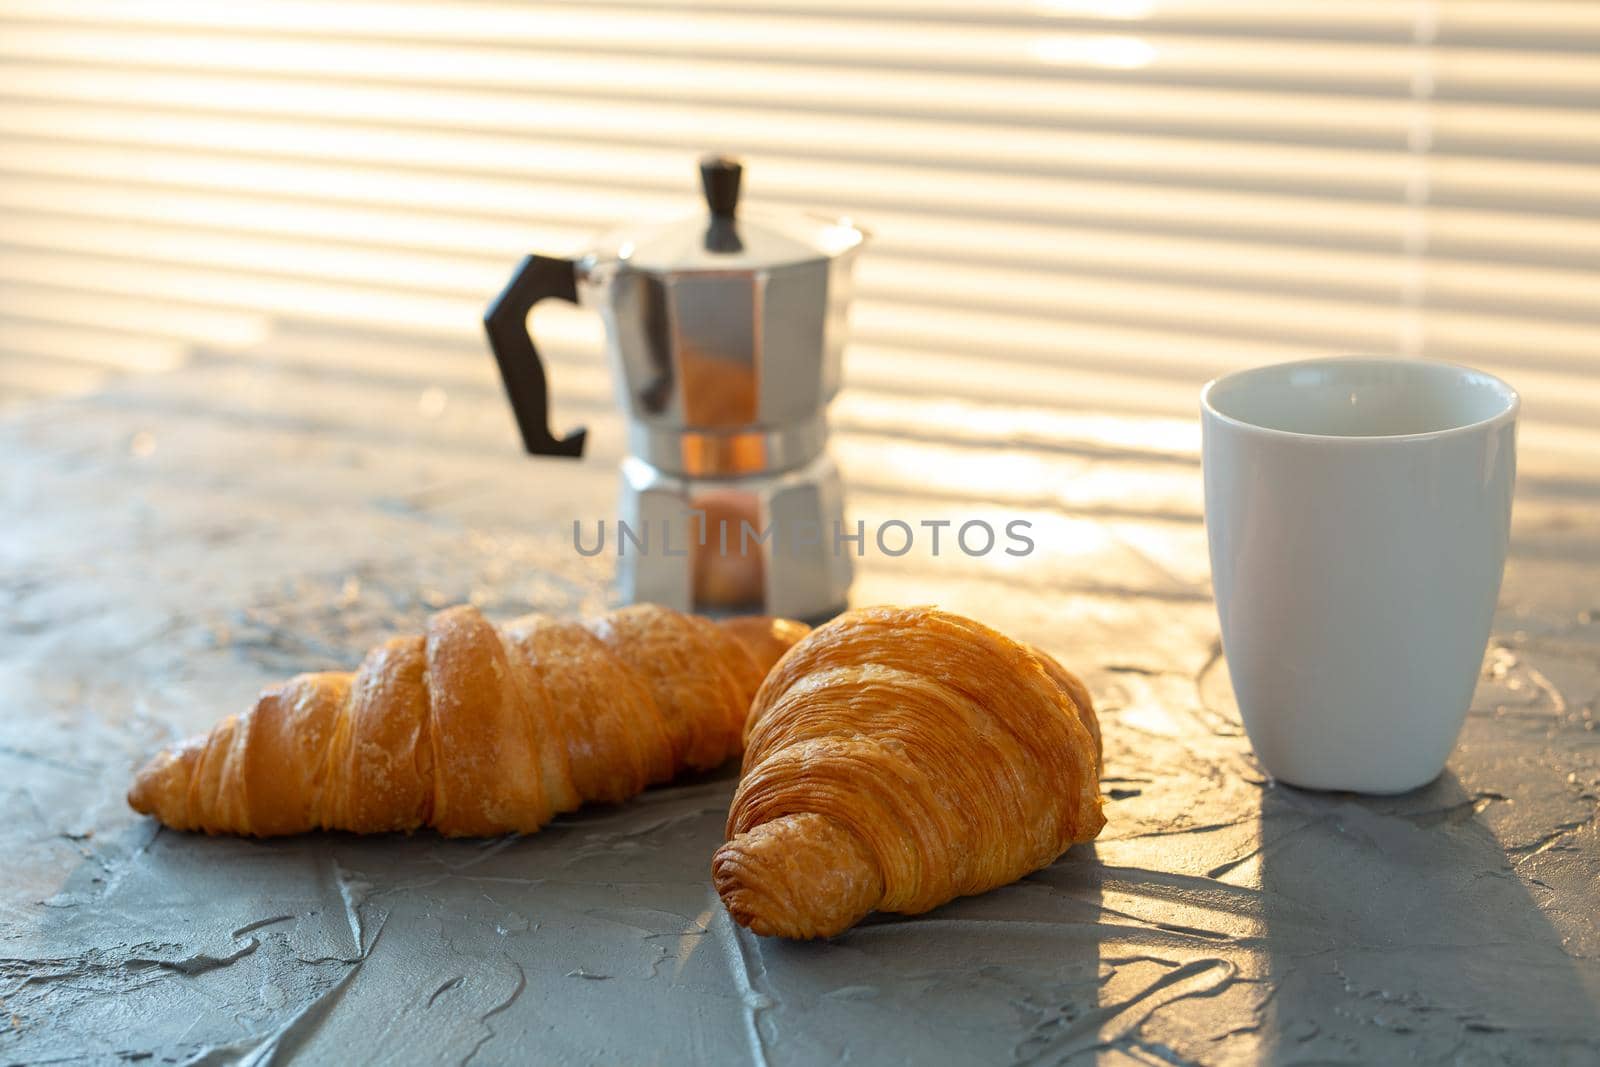 Breakfast with croissant on cutting board and black coffee. Morning meal and breakfast concept. by Satura86